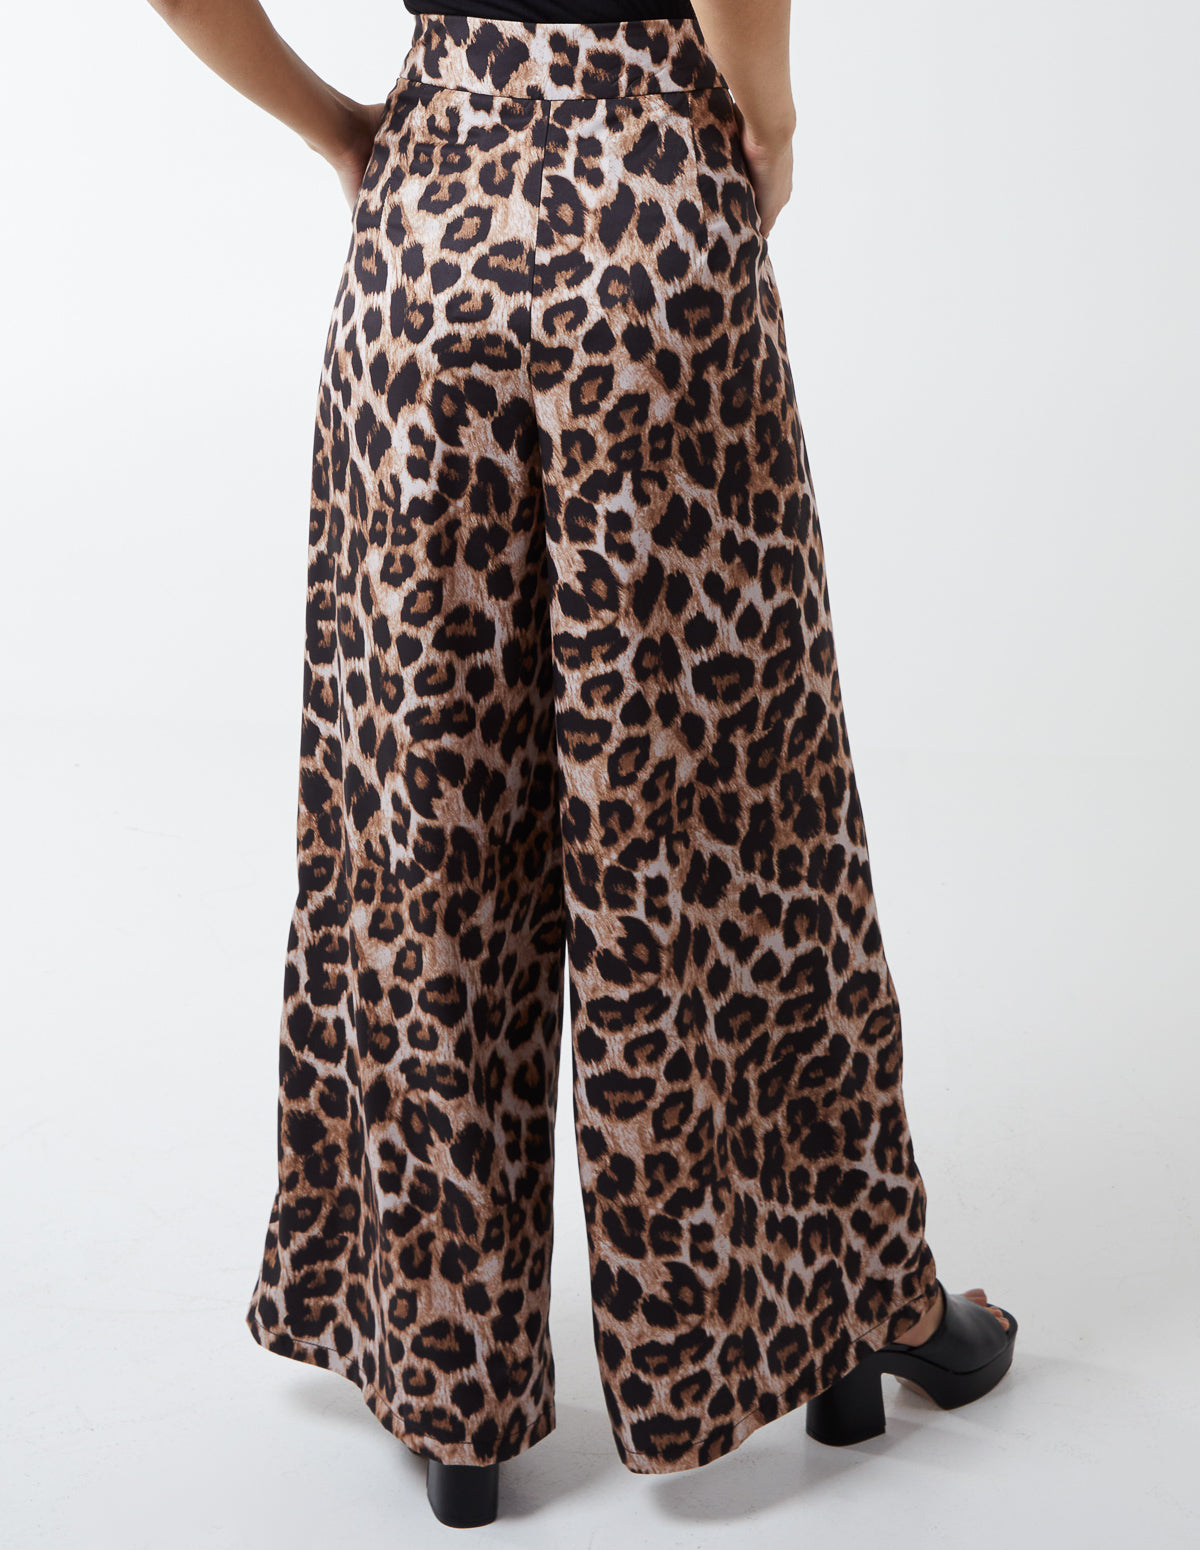 Dashed Leopard Print Trouser  WHISTLES 